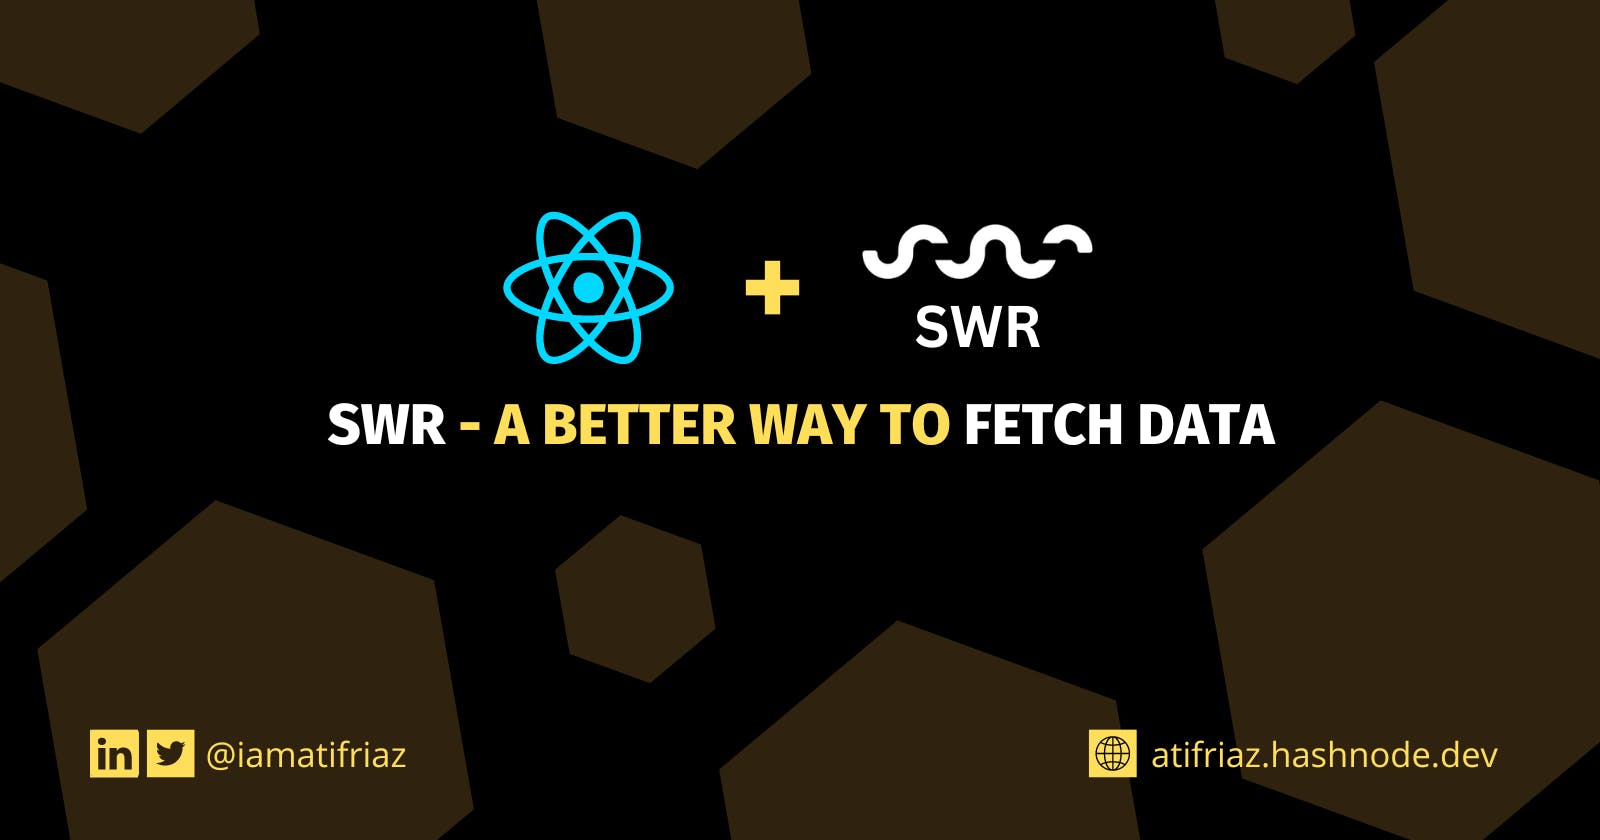 SWR - A Better Way to Fetch Data